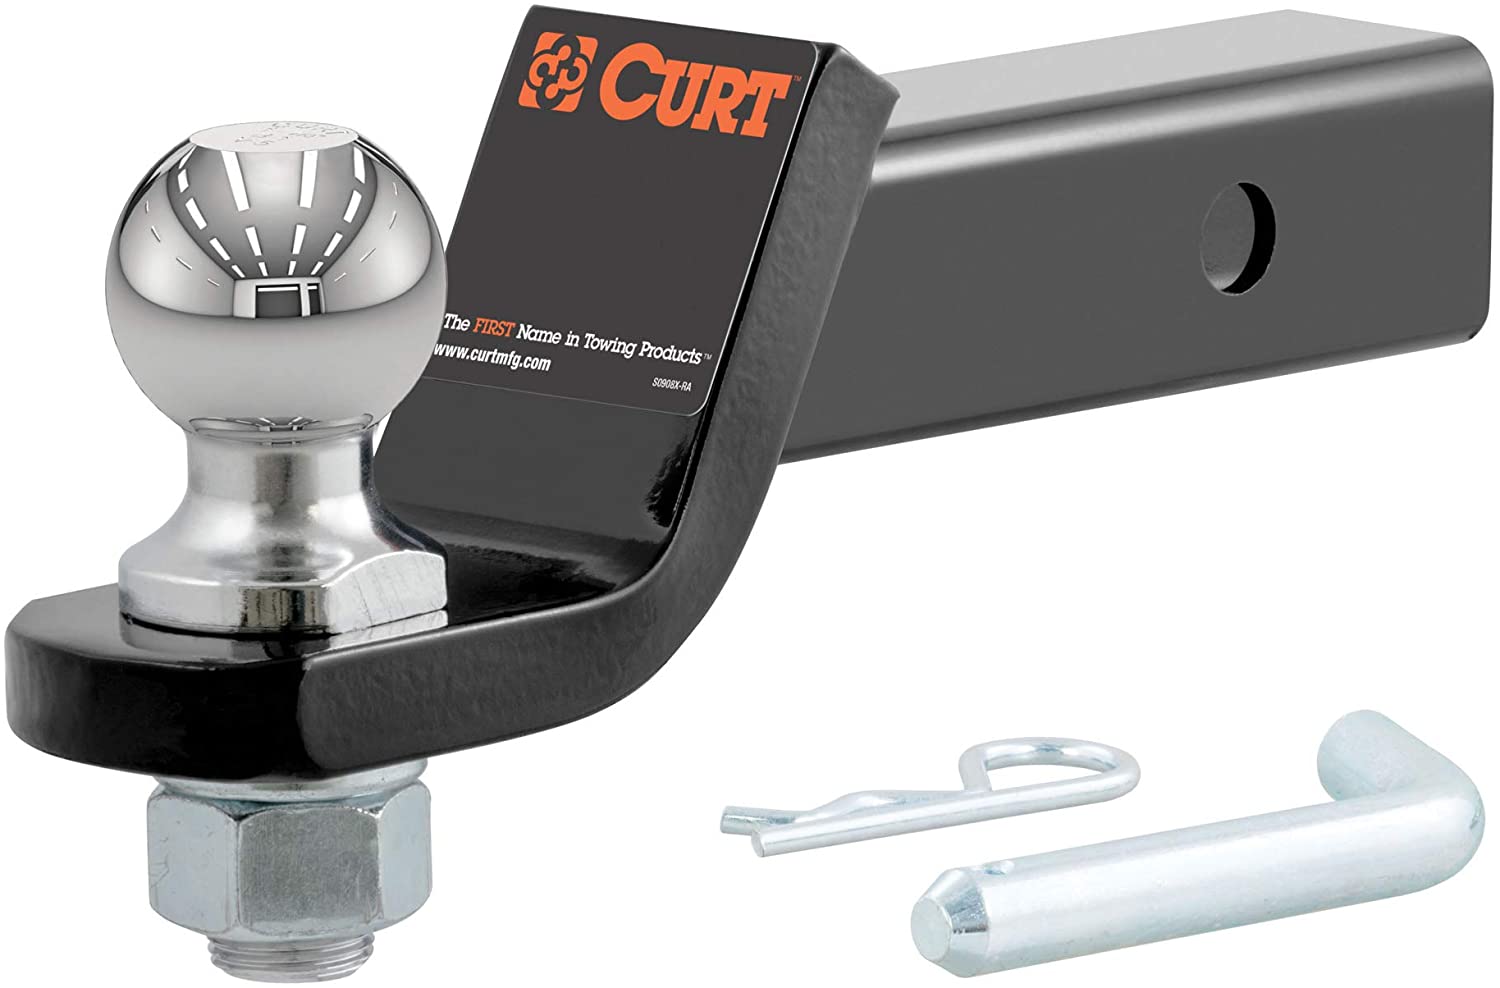 CURT 45036 Trailer Hitch Mount with 2-Inch Ball & Pin, Fits 2-in Receiver, 7,500 lbs, 2